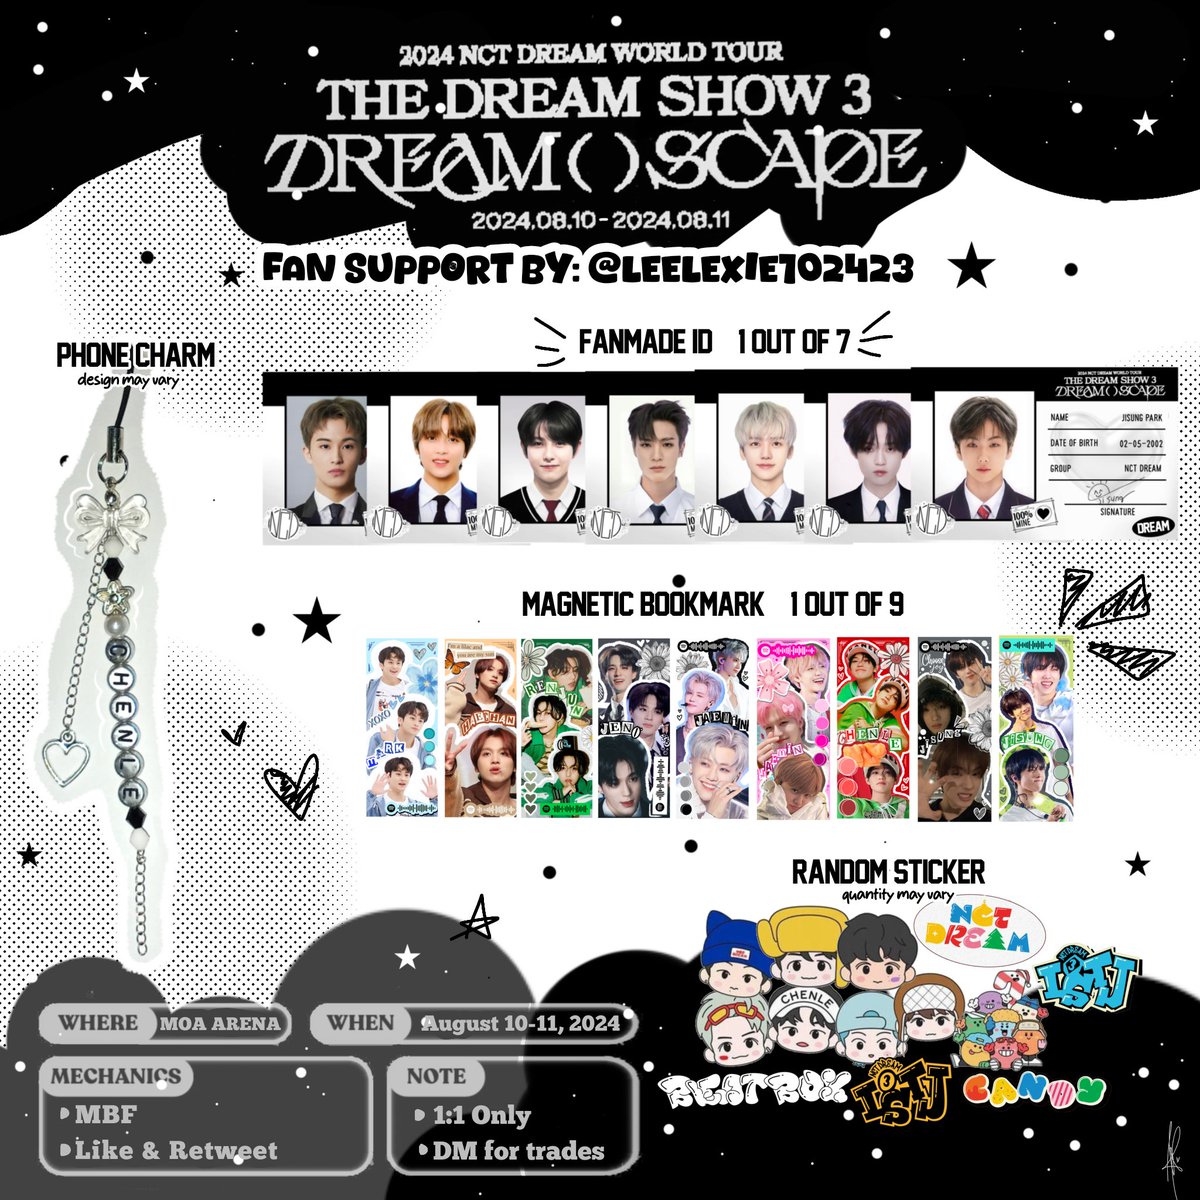 •*.✧ The Dream Show 3 in Manila ✧.*• Fan support by @leelexie102423 ♡ mbf, rt & like ♡ limited qty ♡ exact time & location tba ♡ dm me for trades! #NCTDREAM_THEDREAMSHOW3_in_MNL #THEDREAMSHOW3_in_MANILA